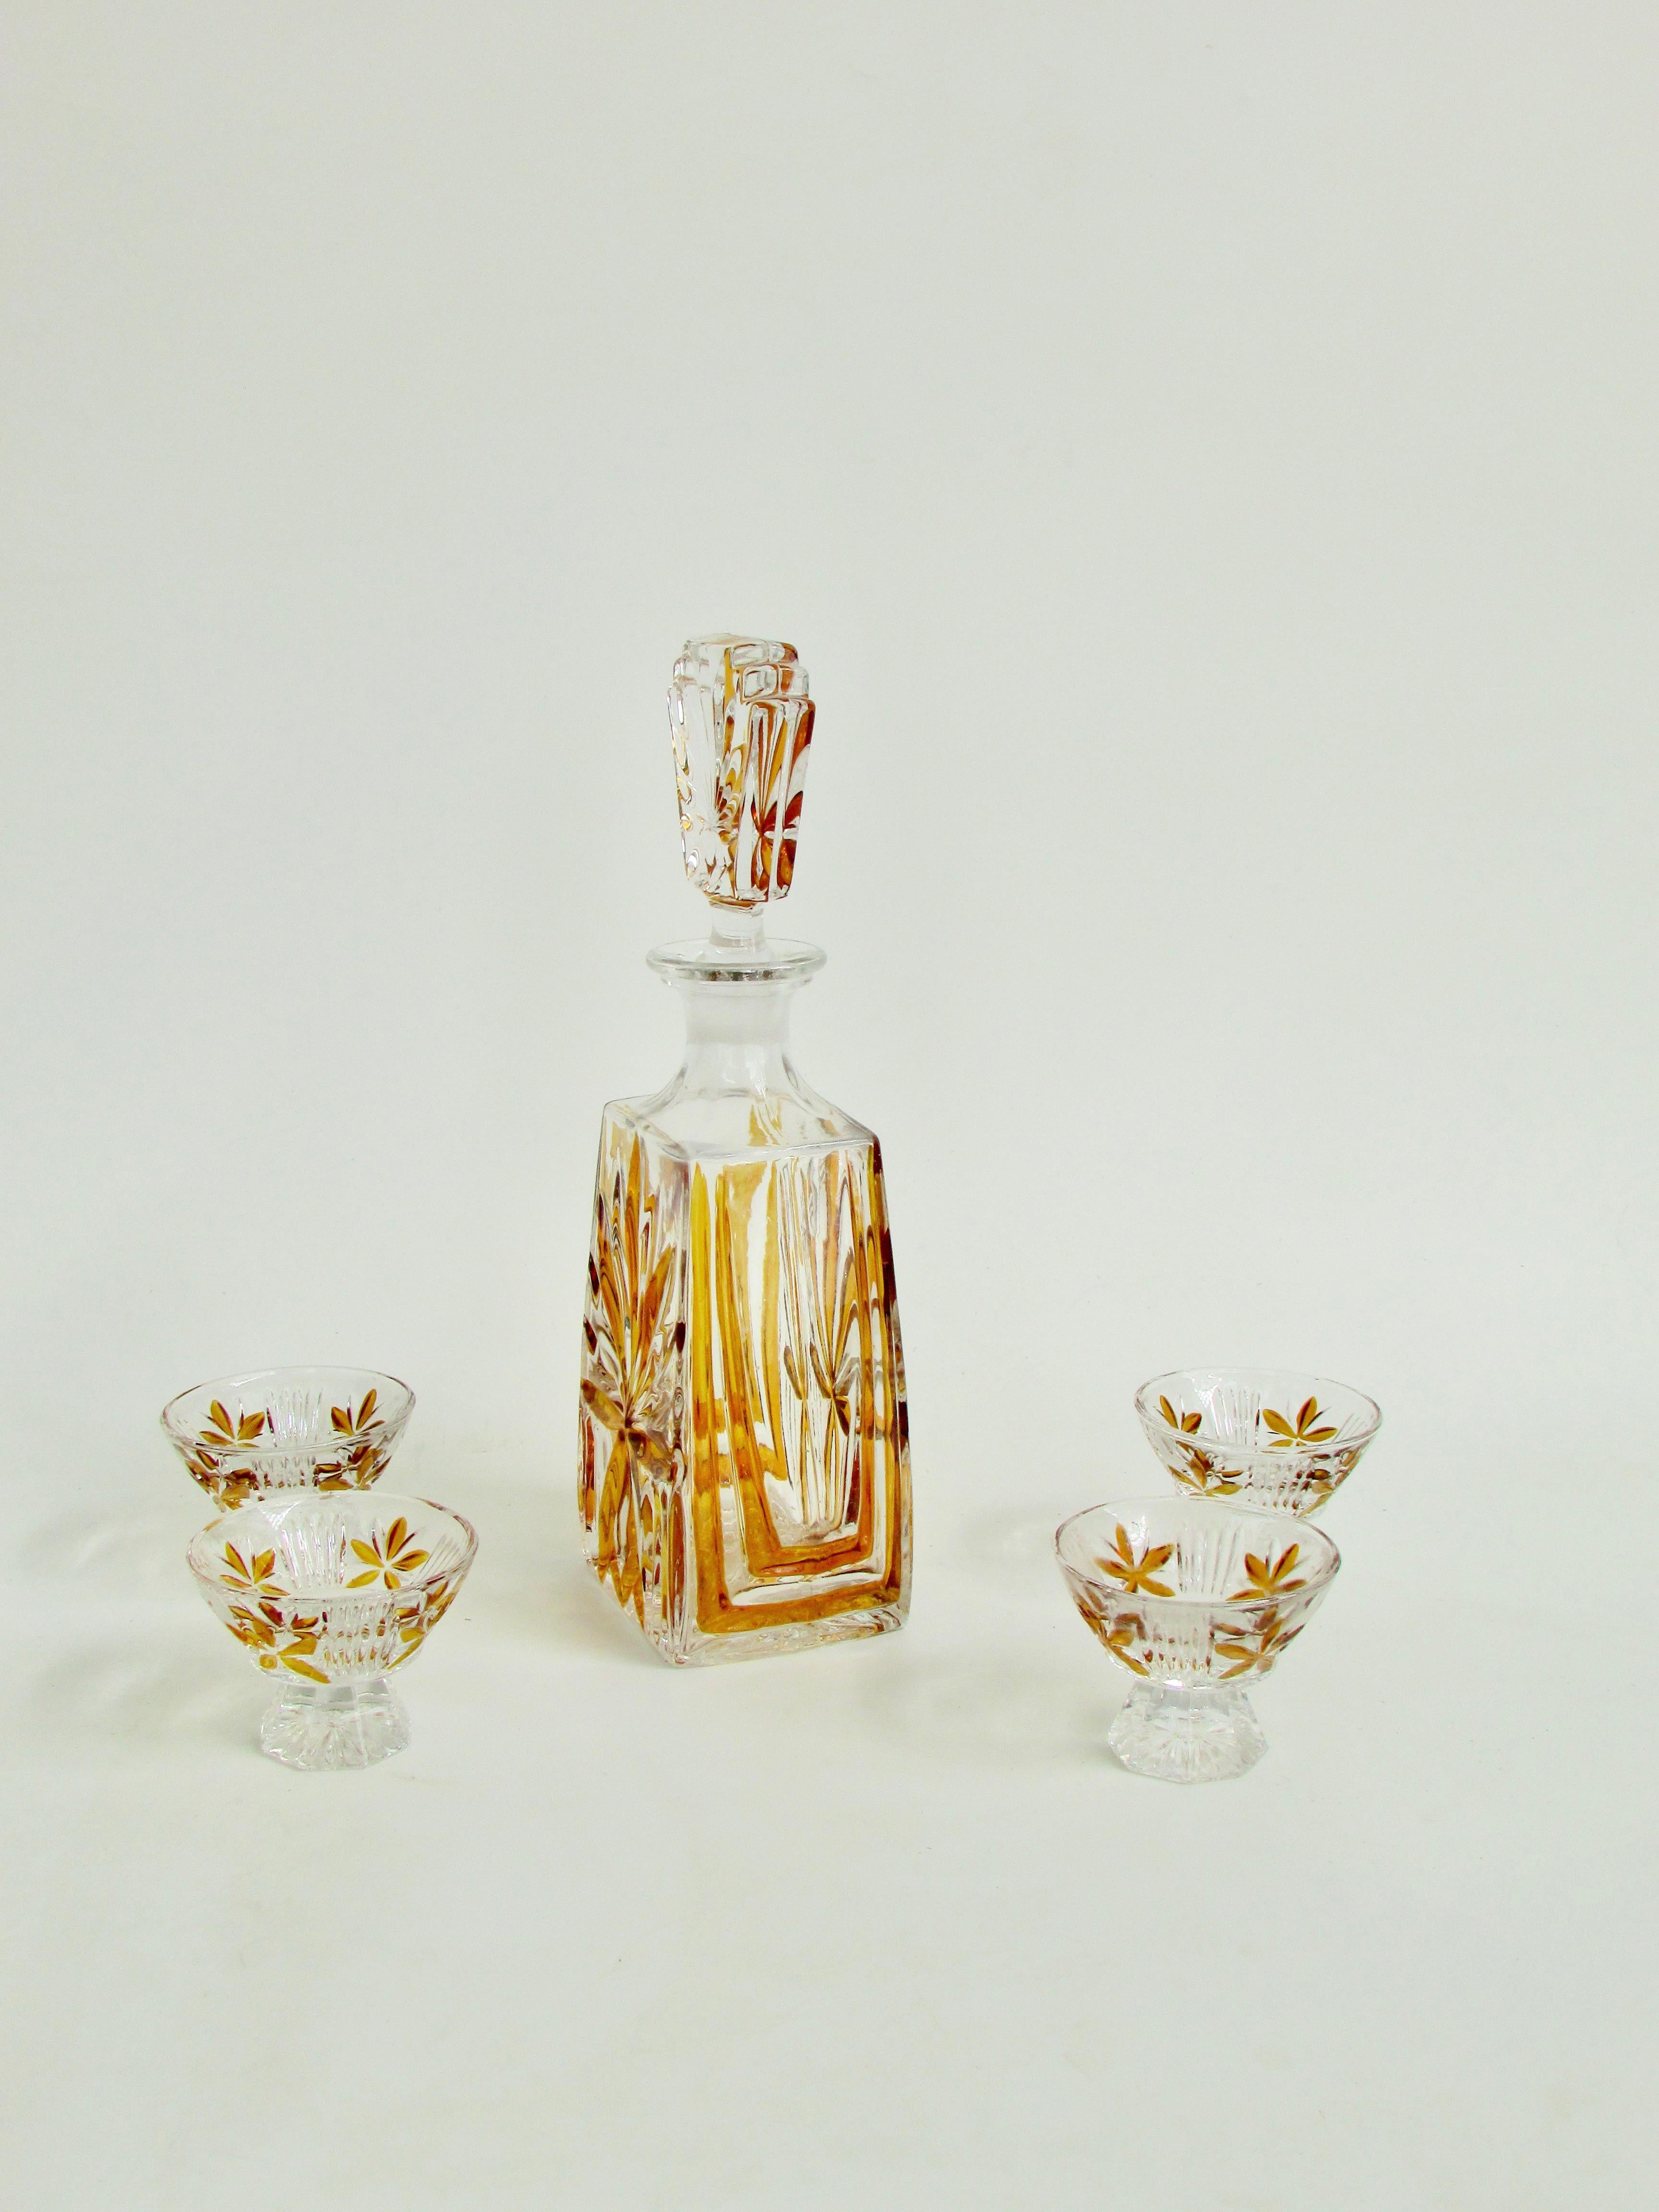 Art Glass Art Deco era amber design on clear glass decanter with stopper and four cups For Sale